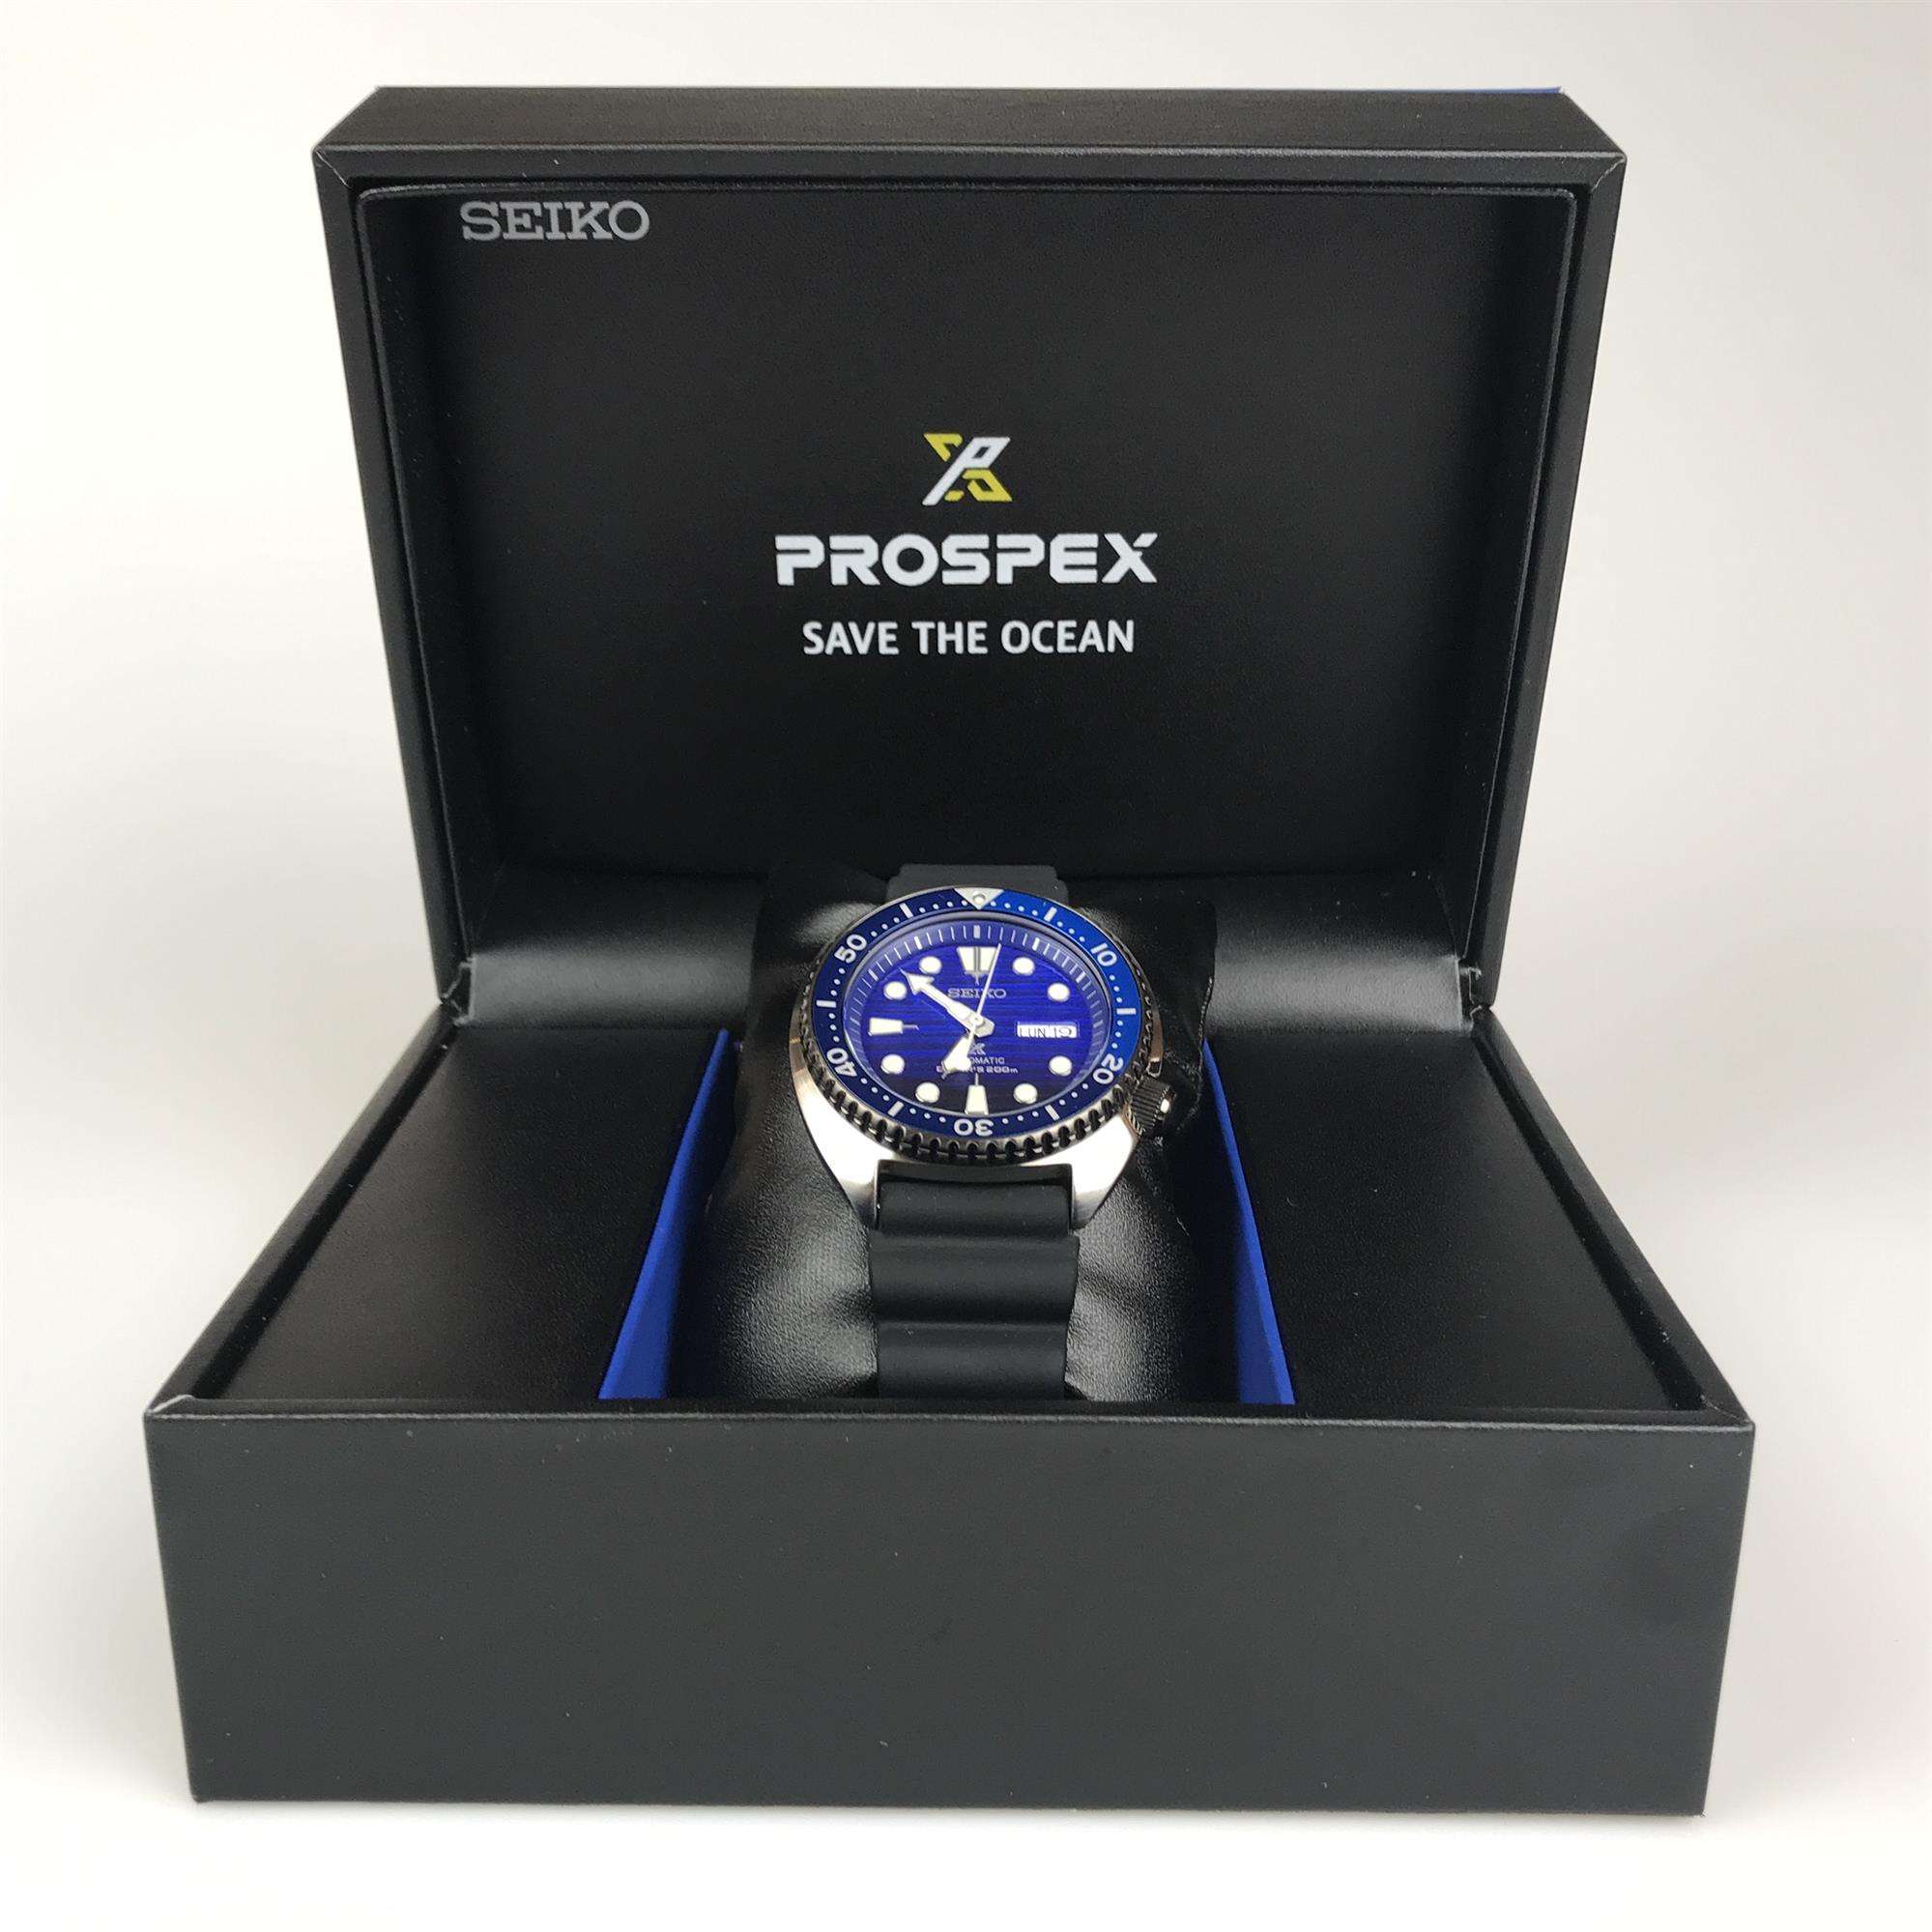 Seiko Prospex Automatic Turtle Save the Ocean Diver's Watch SRPC91K1